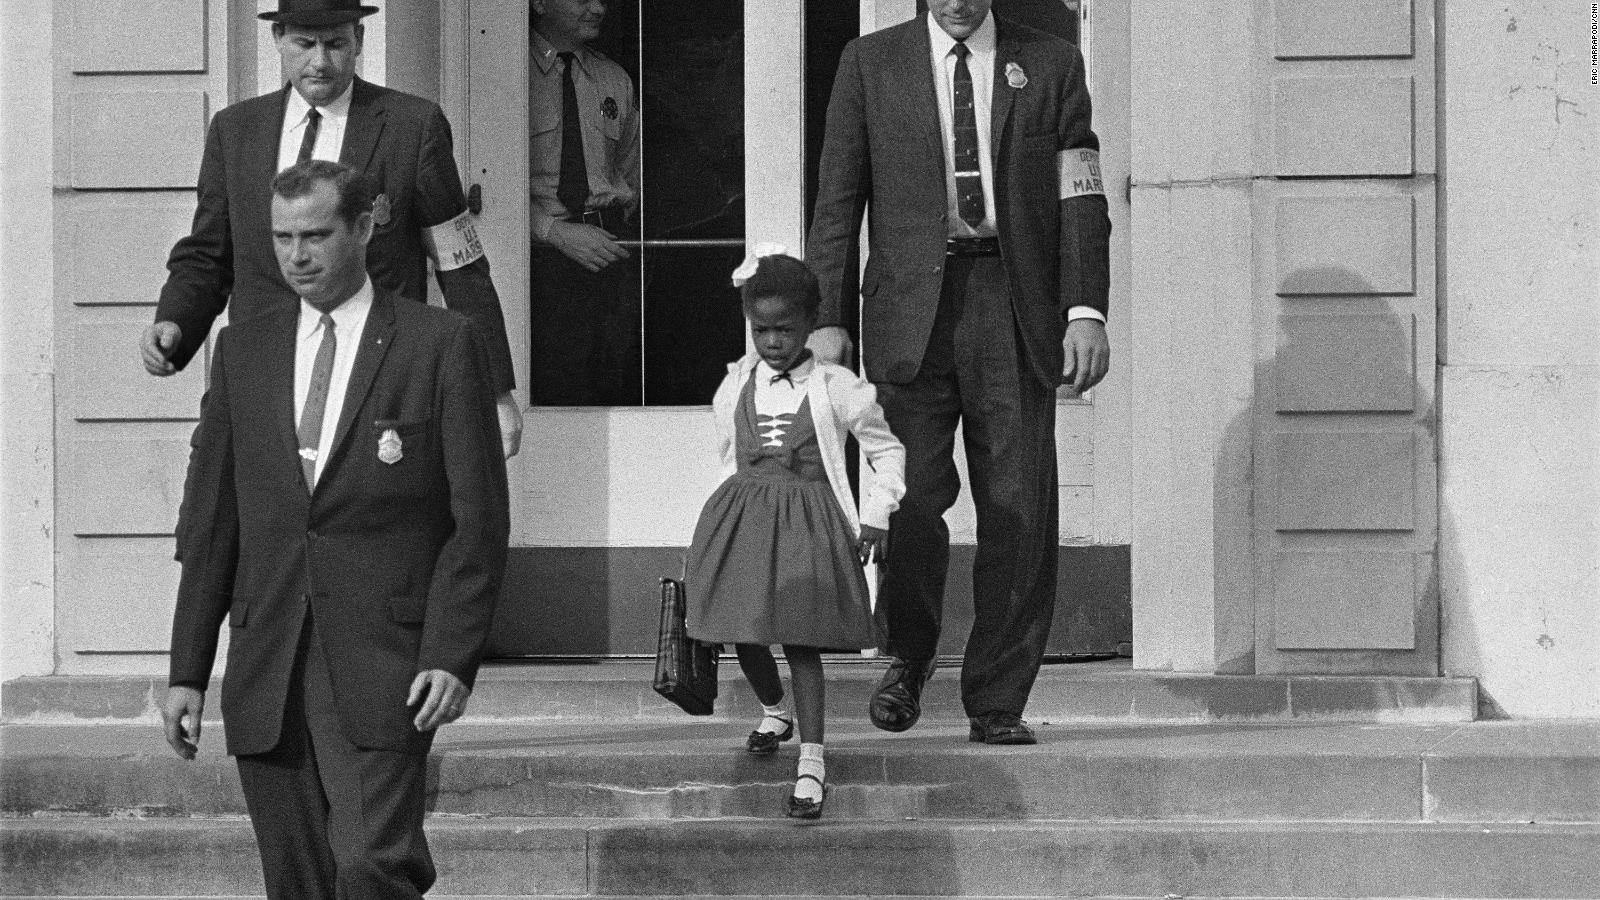 60 years ago today, 6yearold Ruby Bridges walked to school and showed